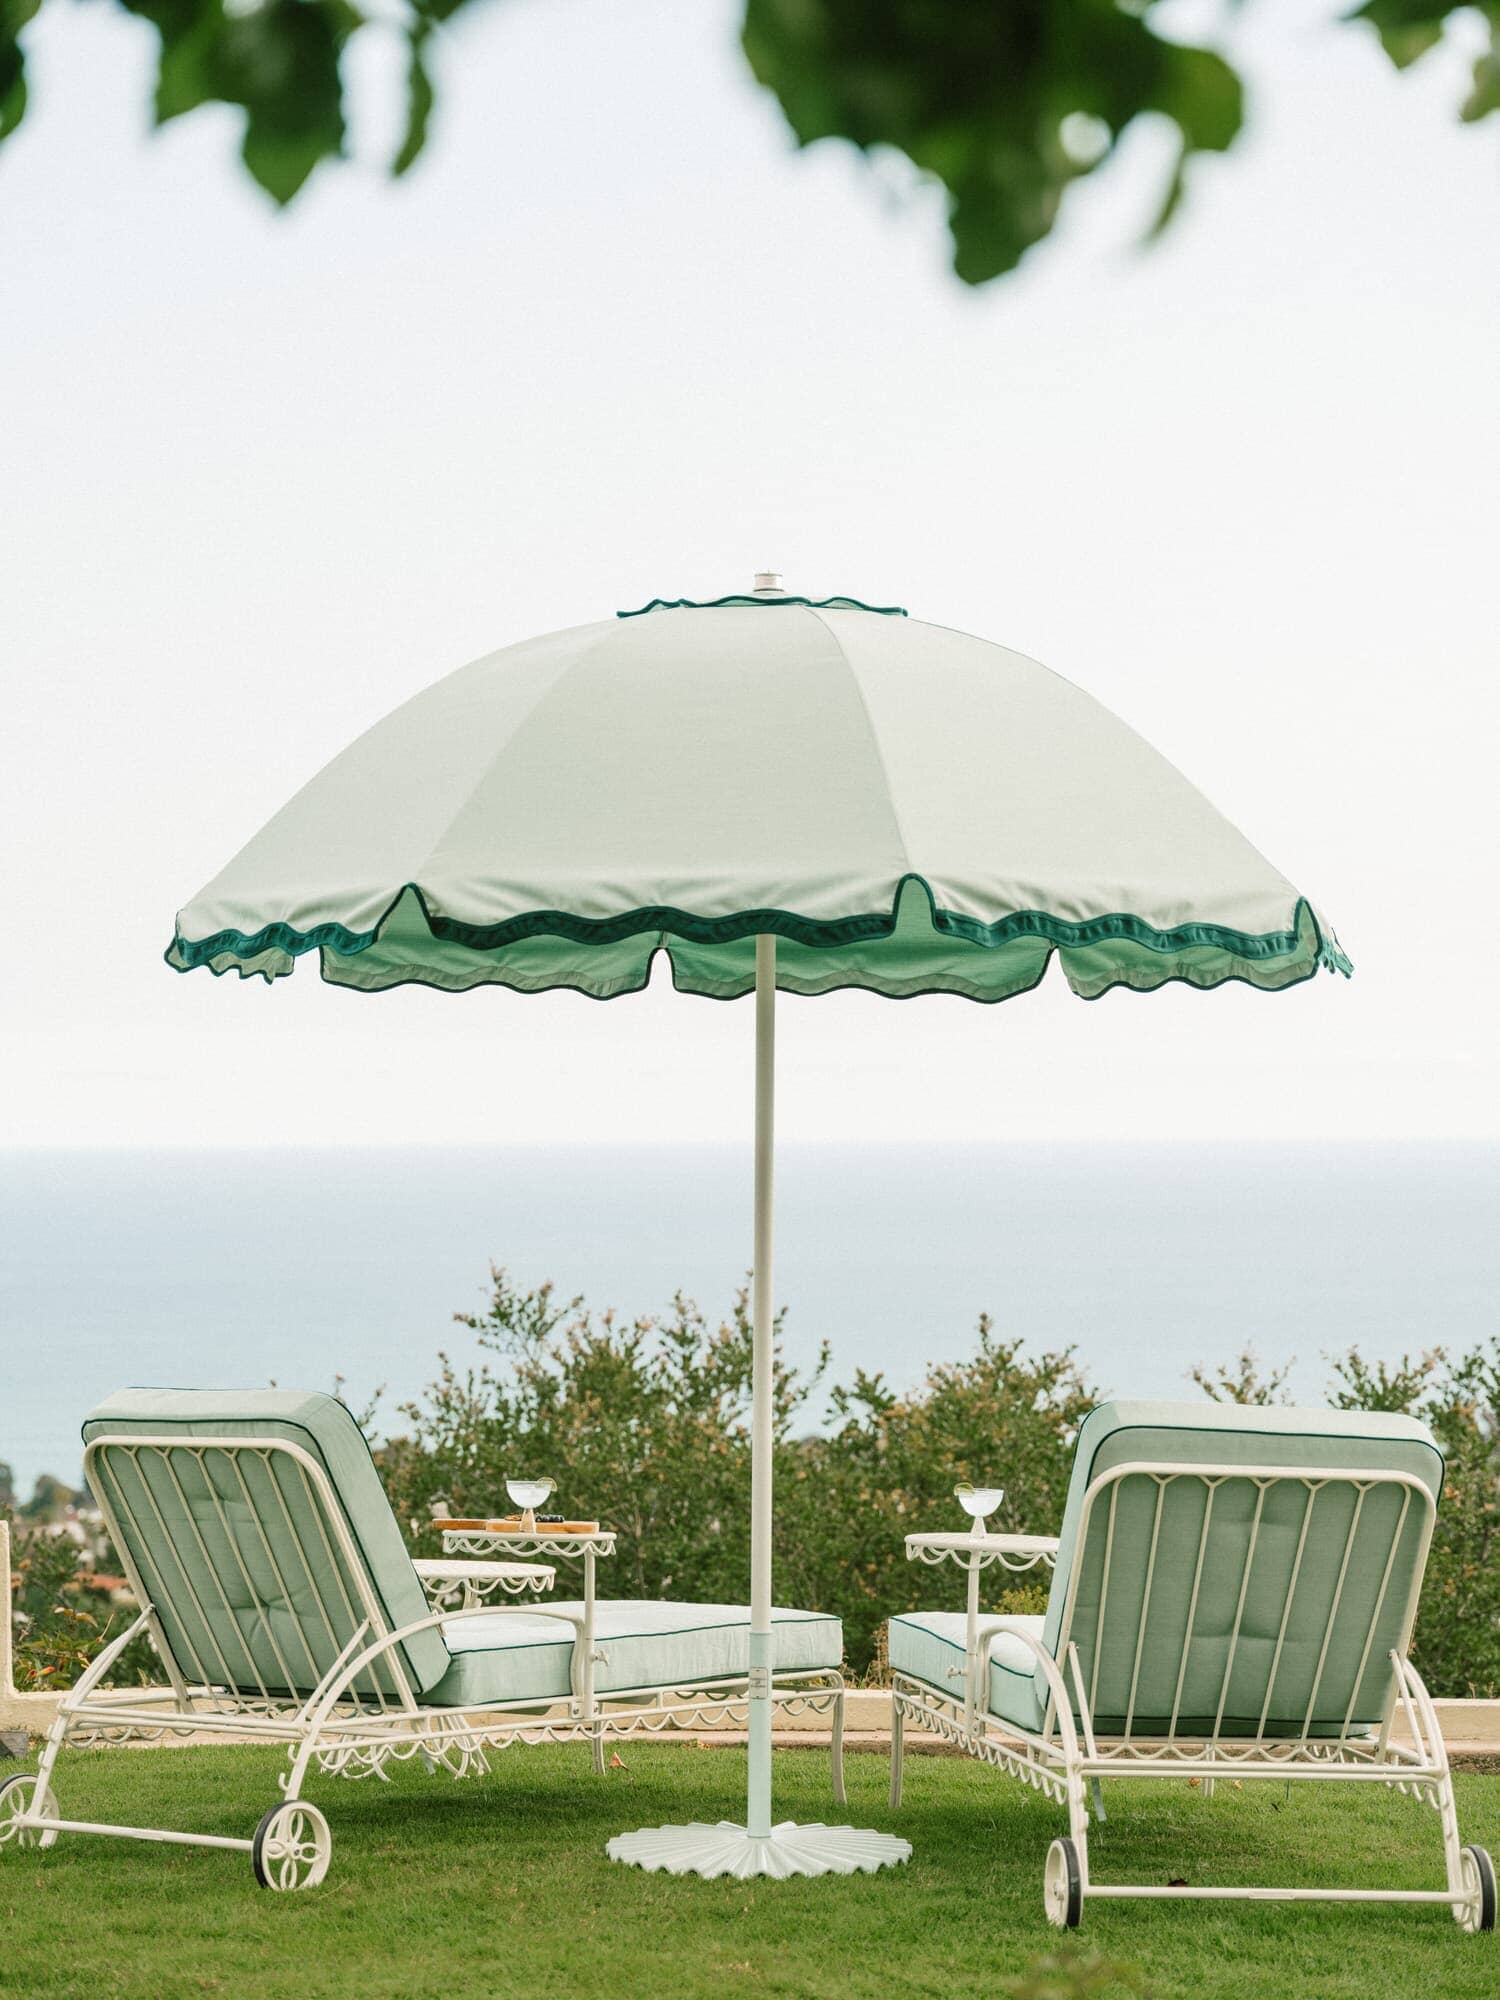 Riviera green sun loungers and umbrella on the grass